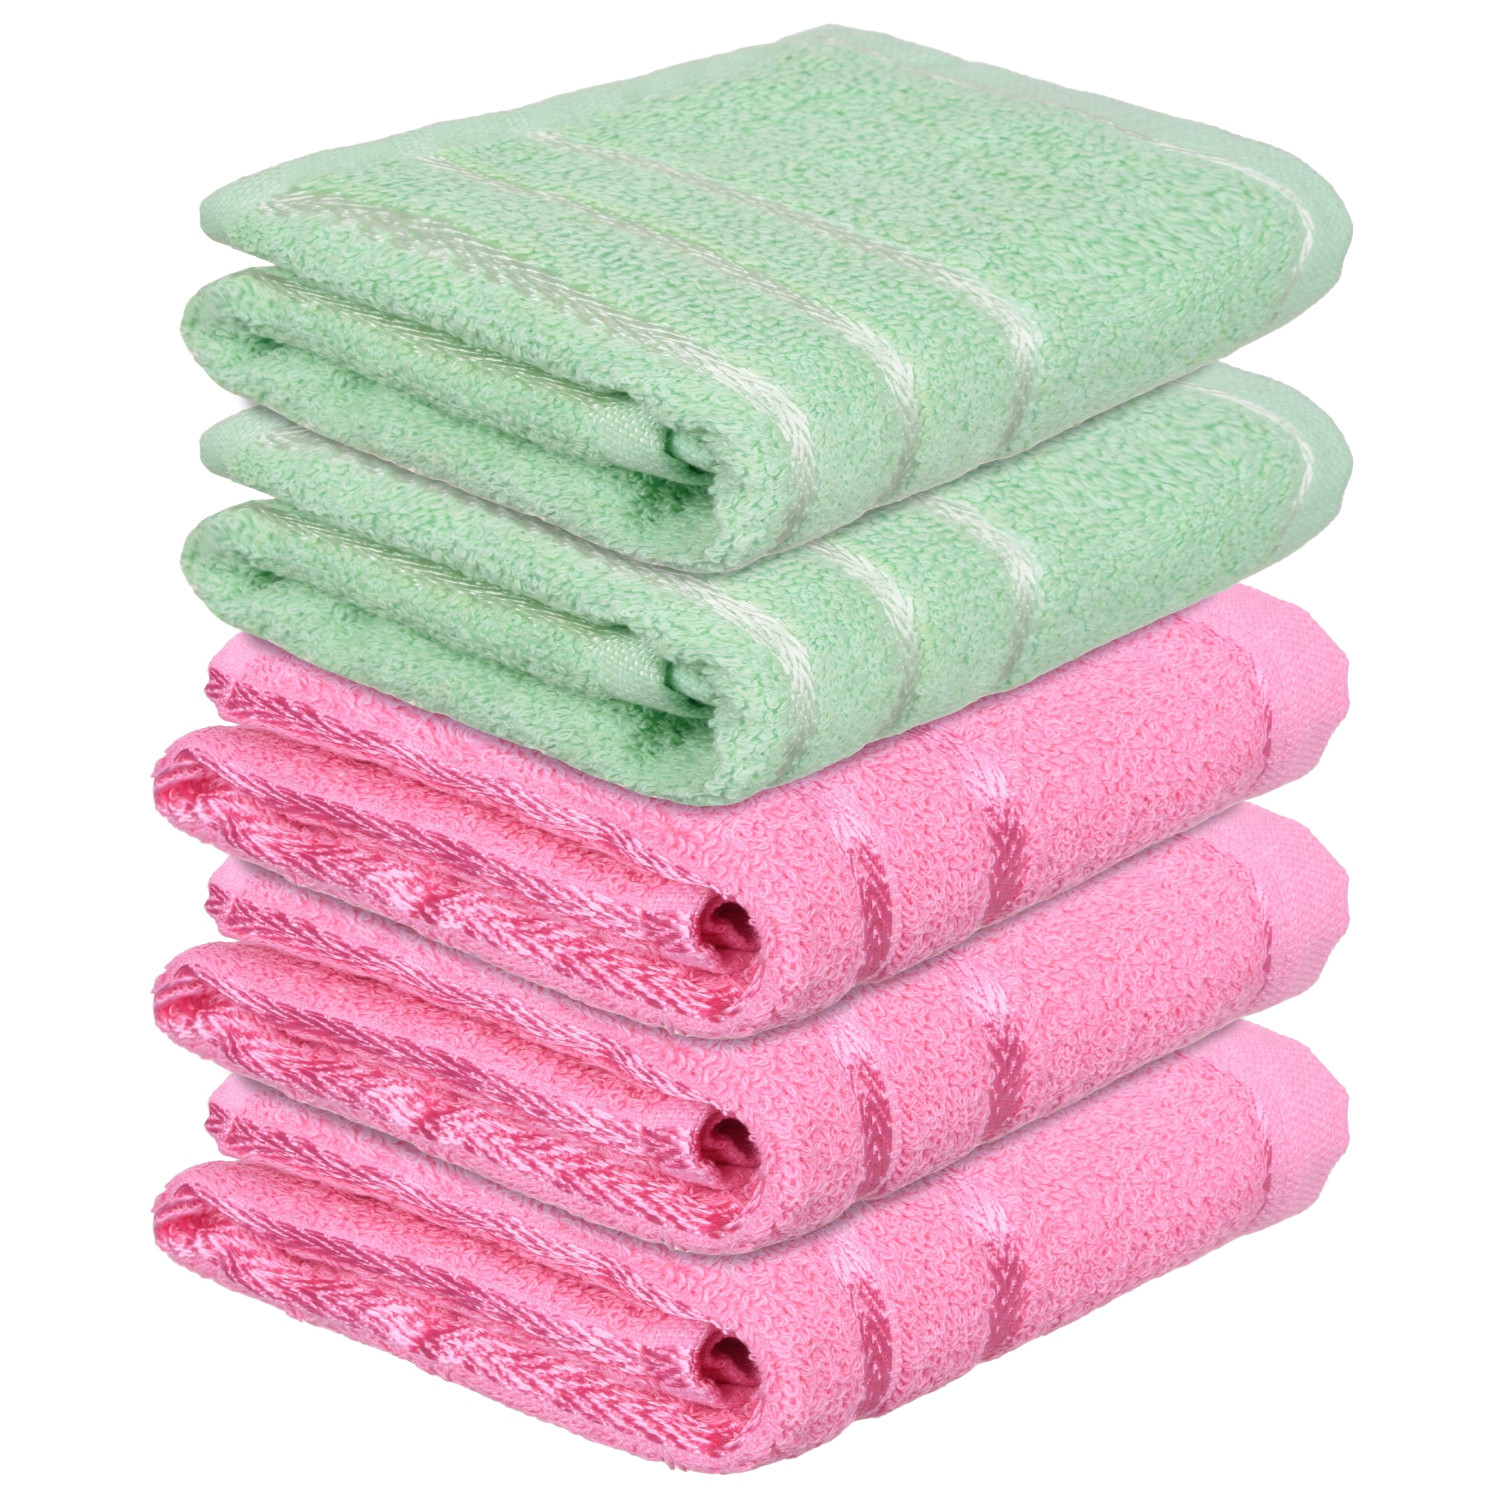 Kuber Industries Face Towel | Towels for Facewash | Towels for Gym | Facewash for Travel | Towels for Daily use | Workout Hand Towel | Lining Design | 14x21 Inch | Pack of 5 | Multi